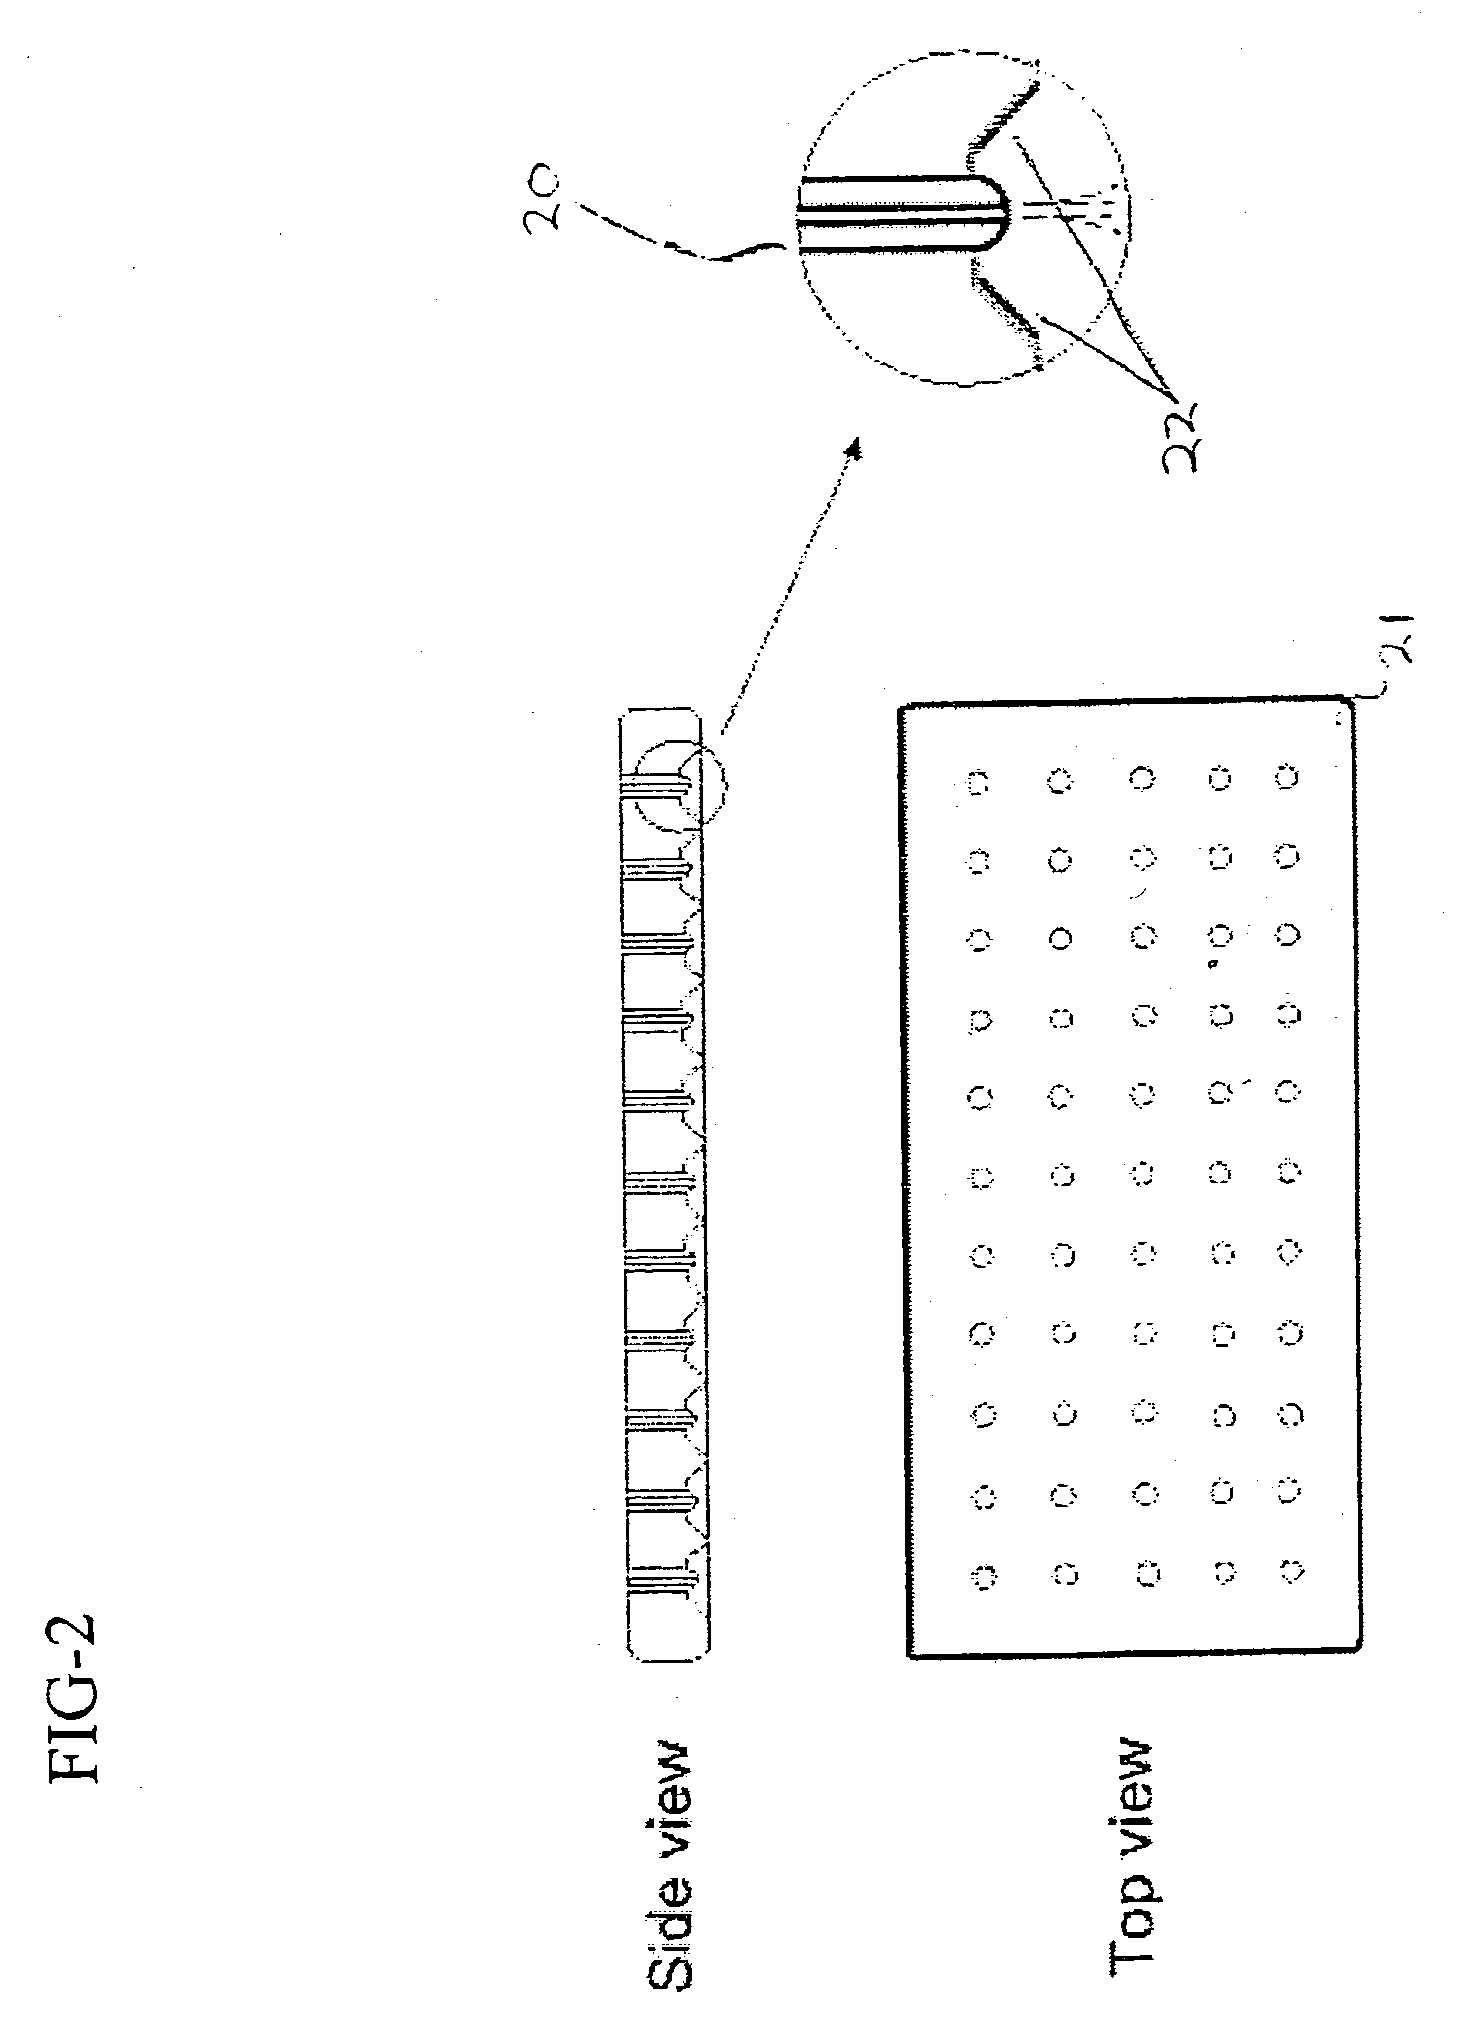 Biodegradable and/or bioabsorbable fibrous articles and methods for using the articles for medical applications